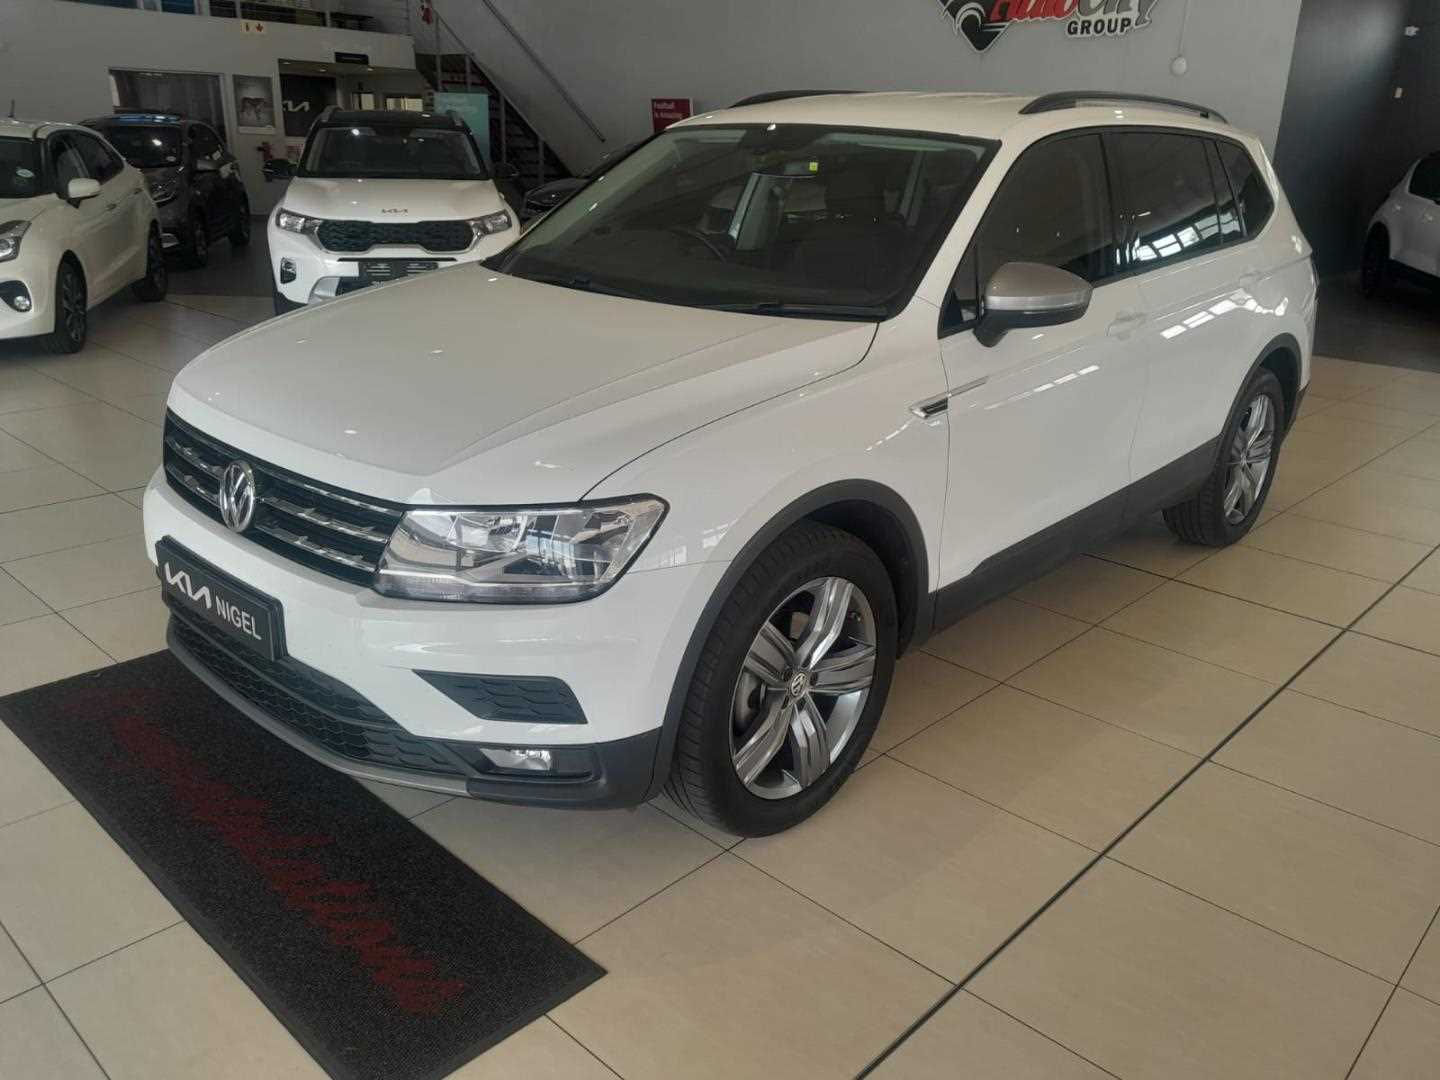 Volkswagen TIGUAN ALLSPACE 1.4 TSI T/LINE DSG (110KW) for Sale in South Africa